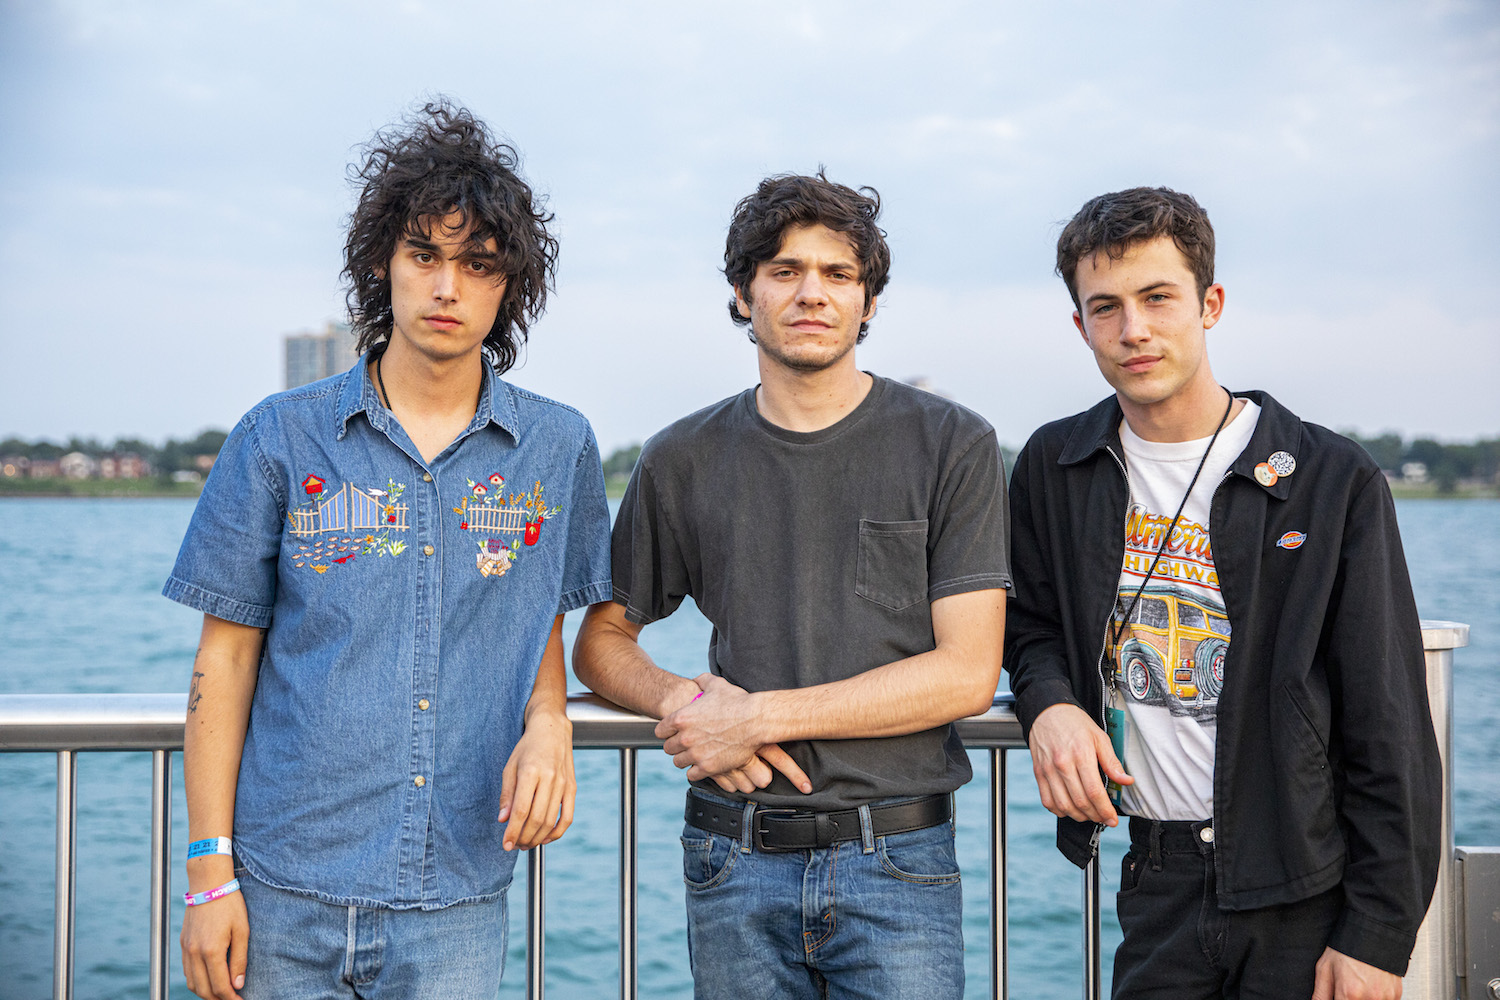 Wallows Share the Secret to a Good Live Performance